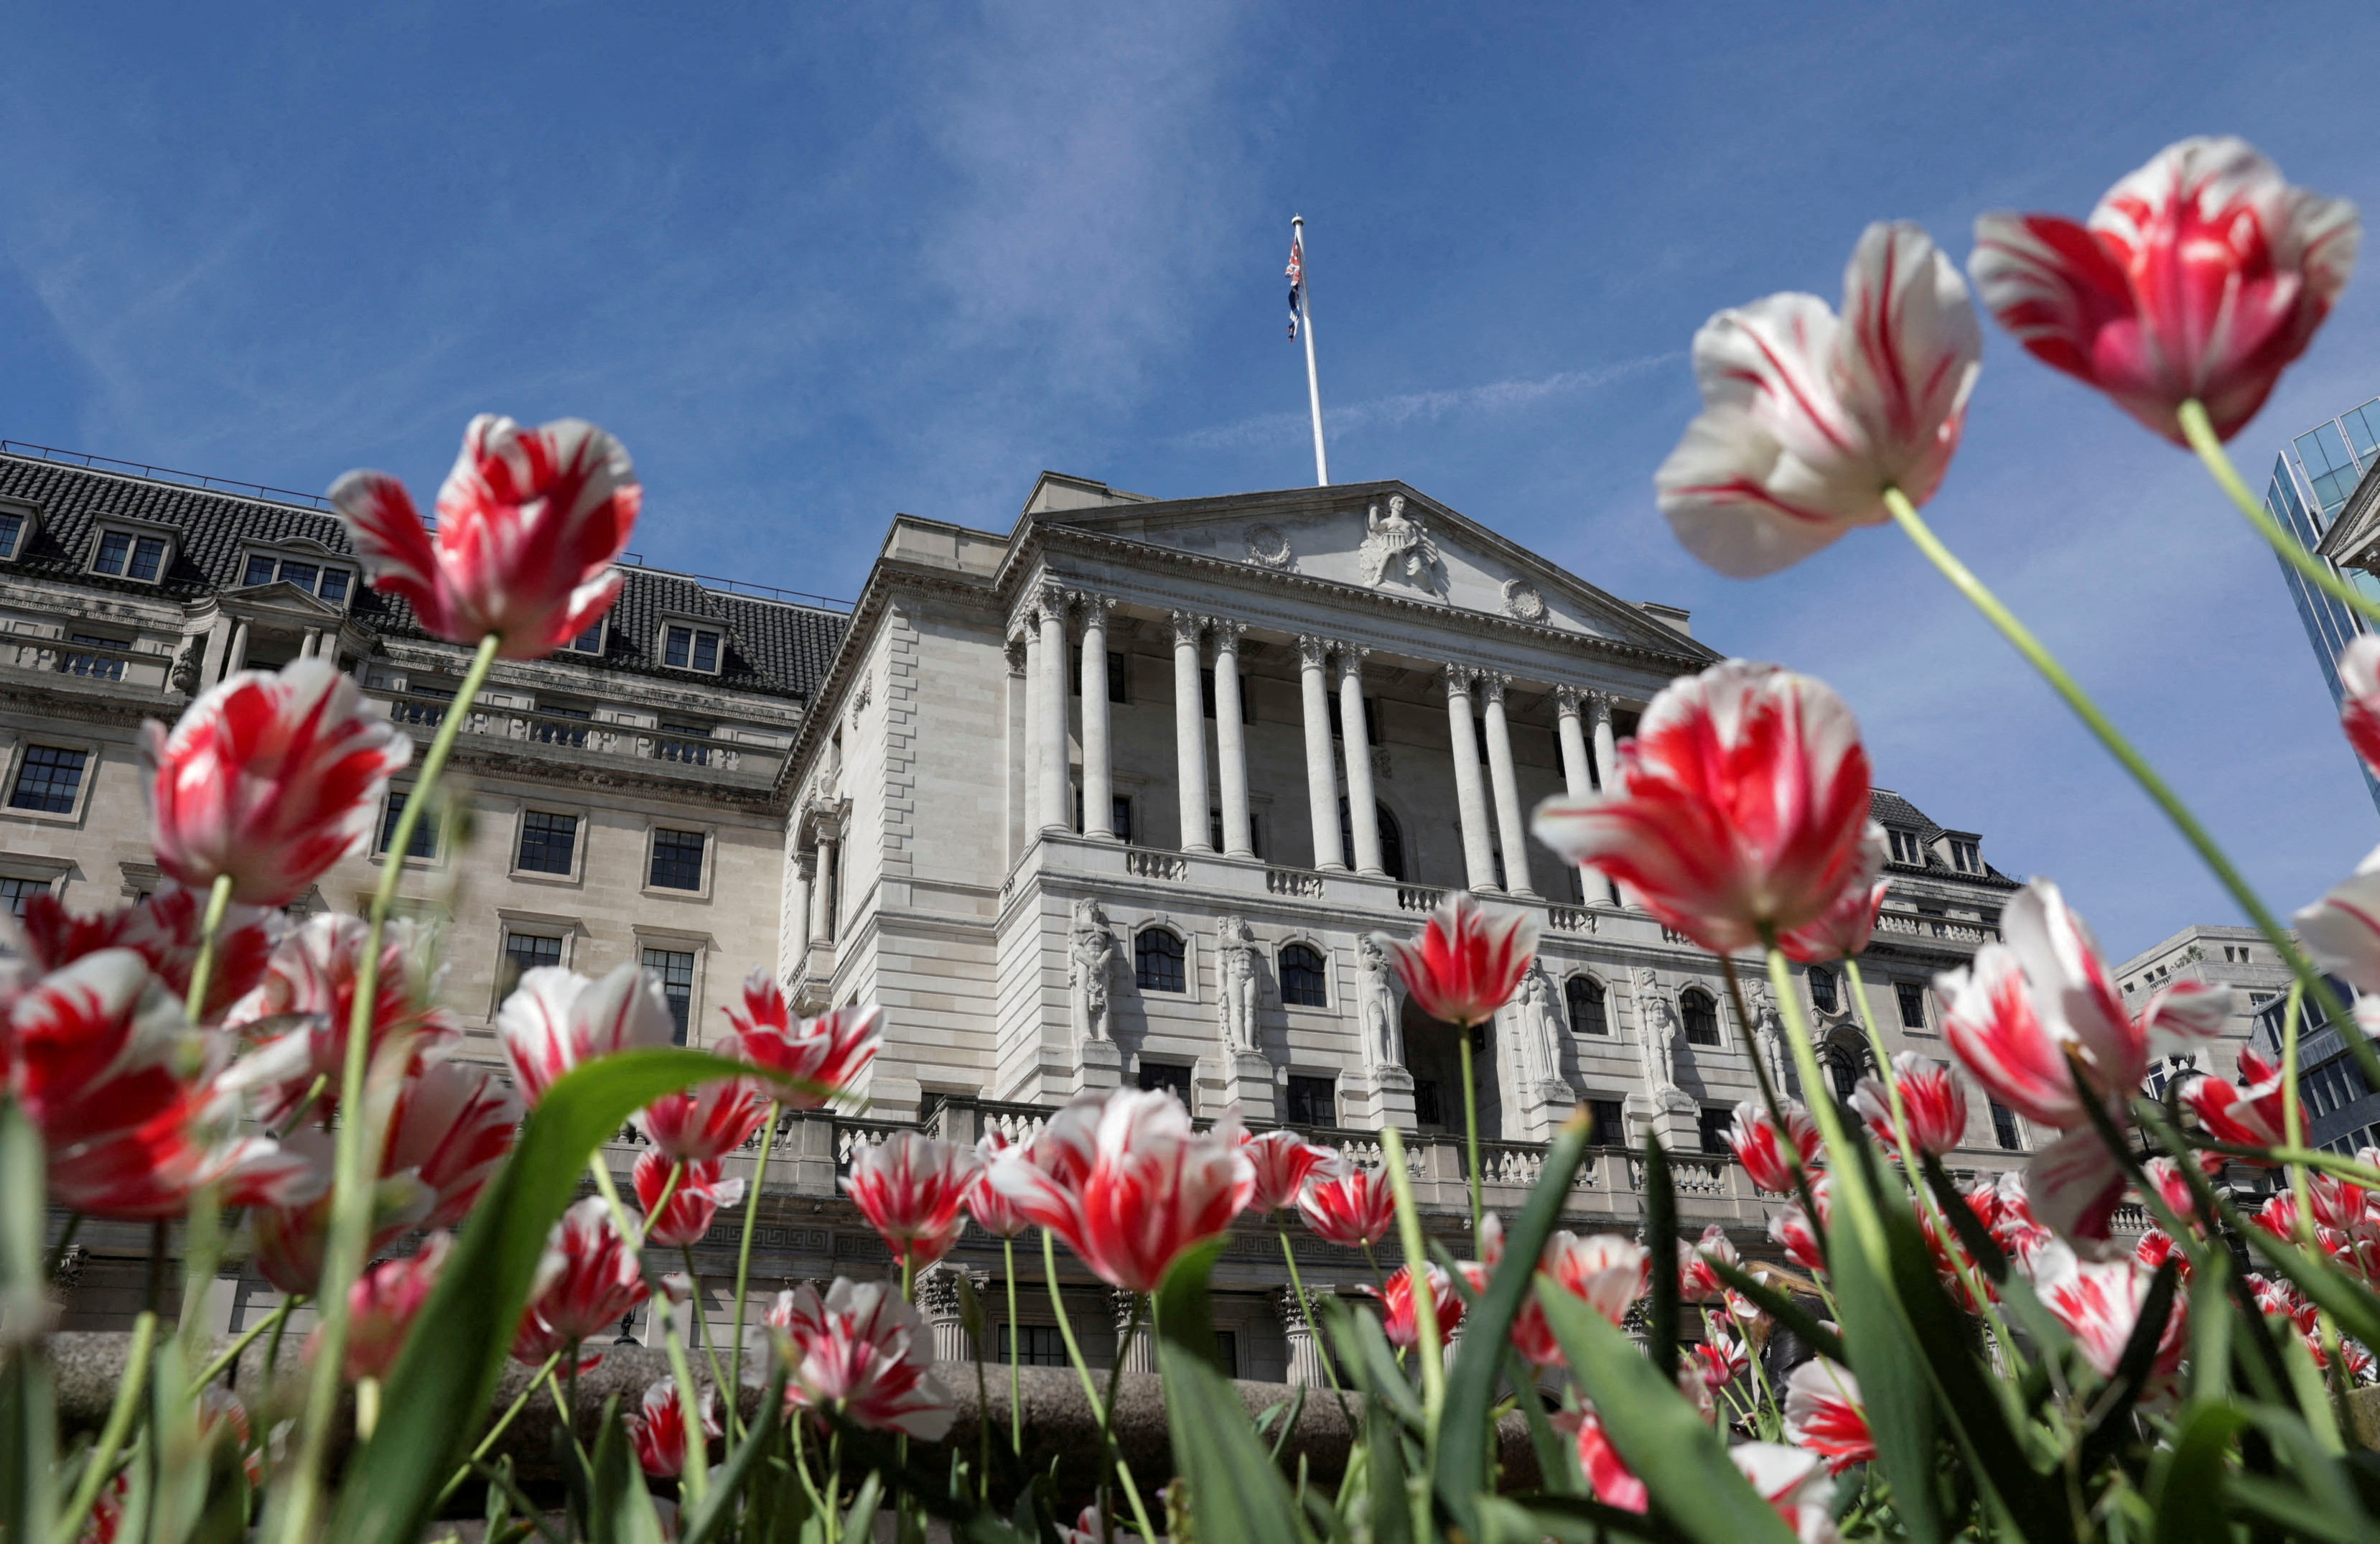 The Bank of England building is seen surrounded by flowers in London